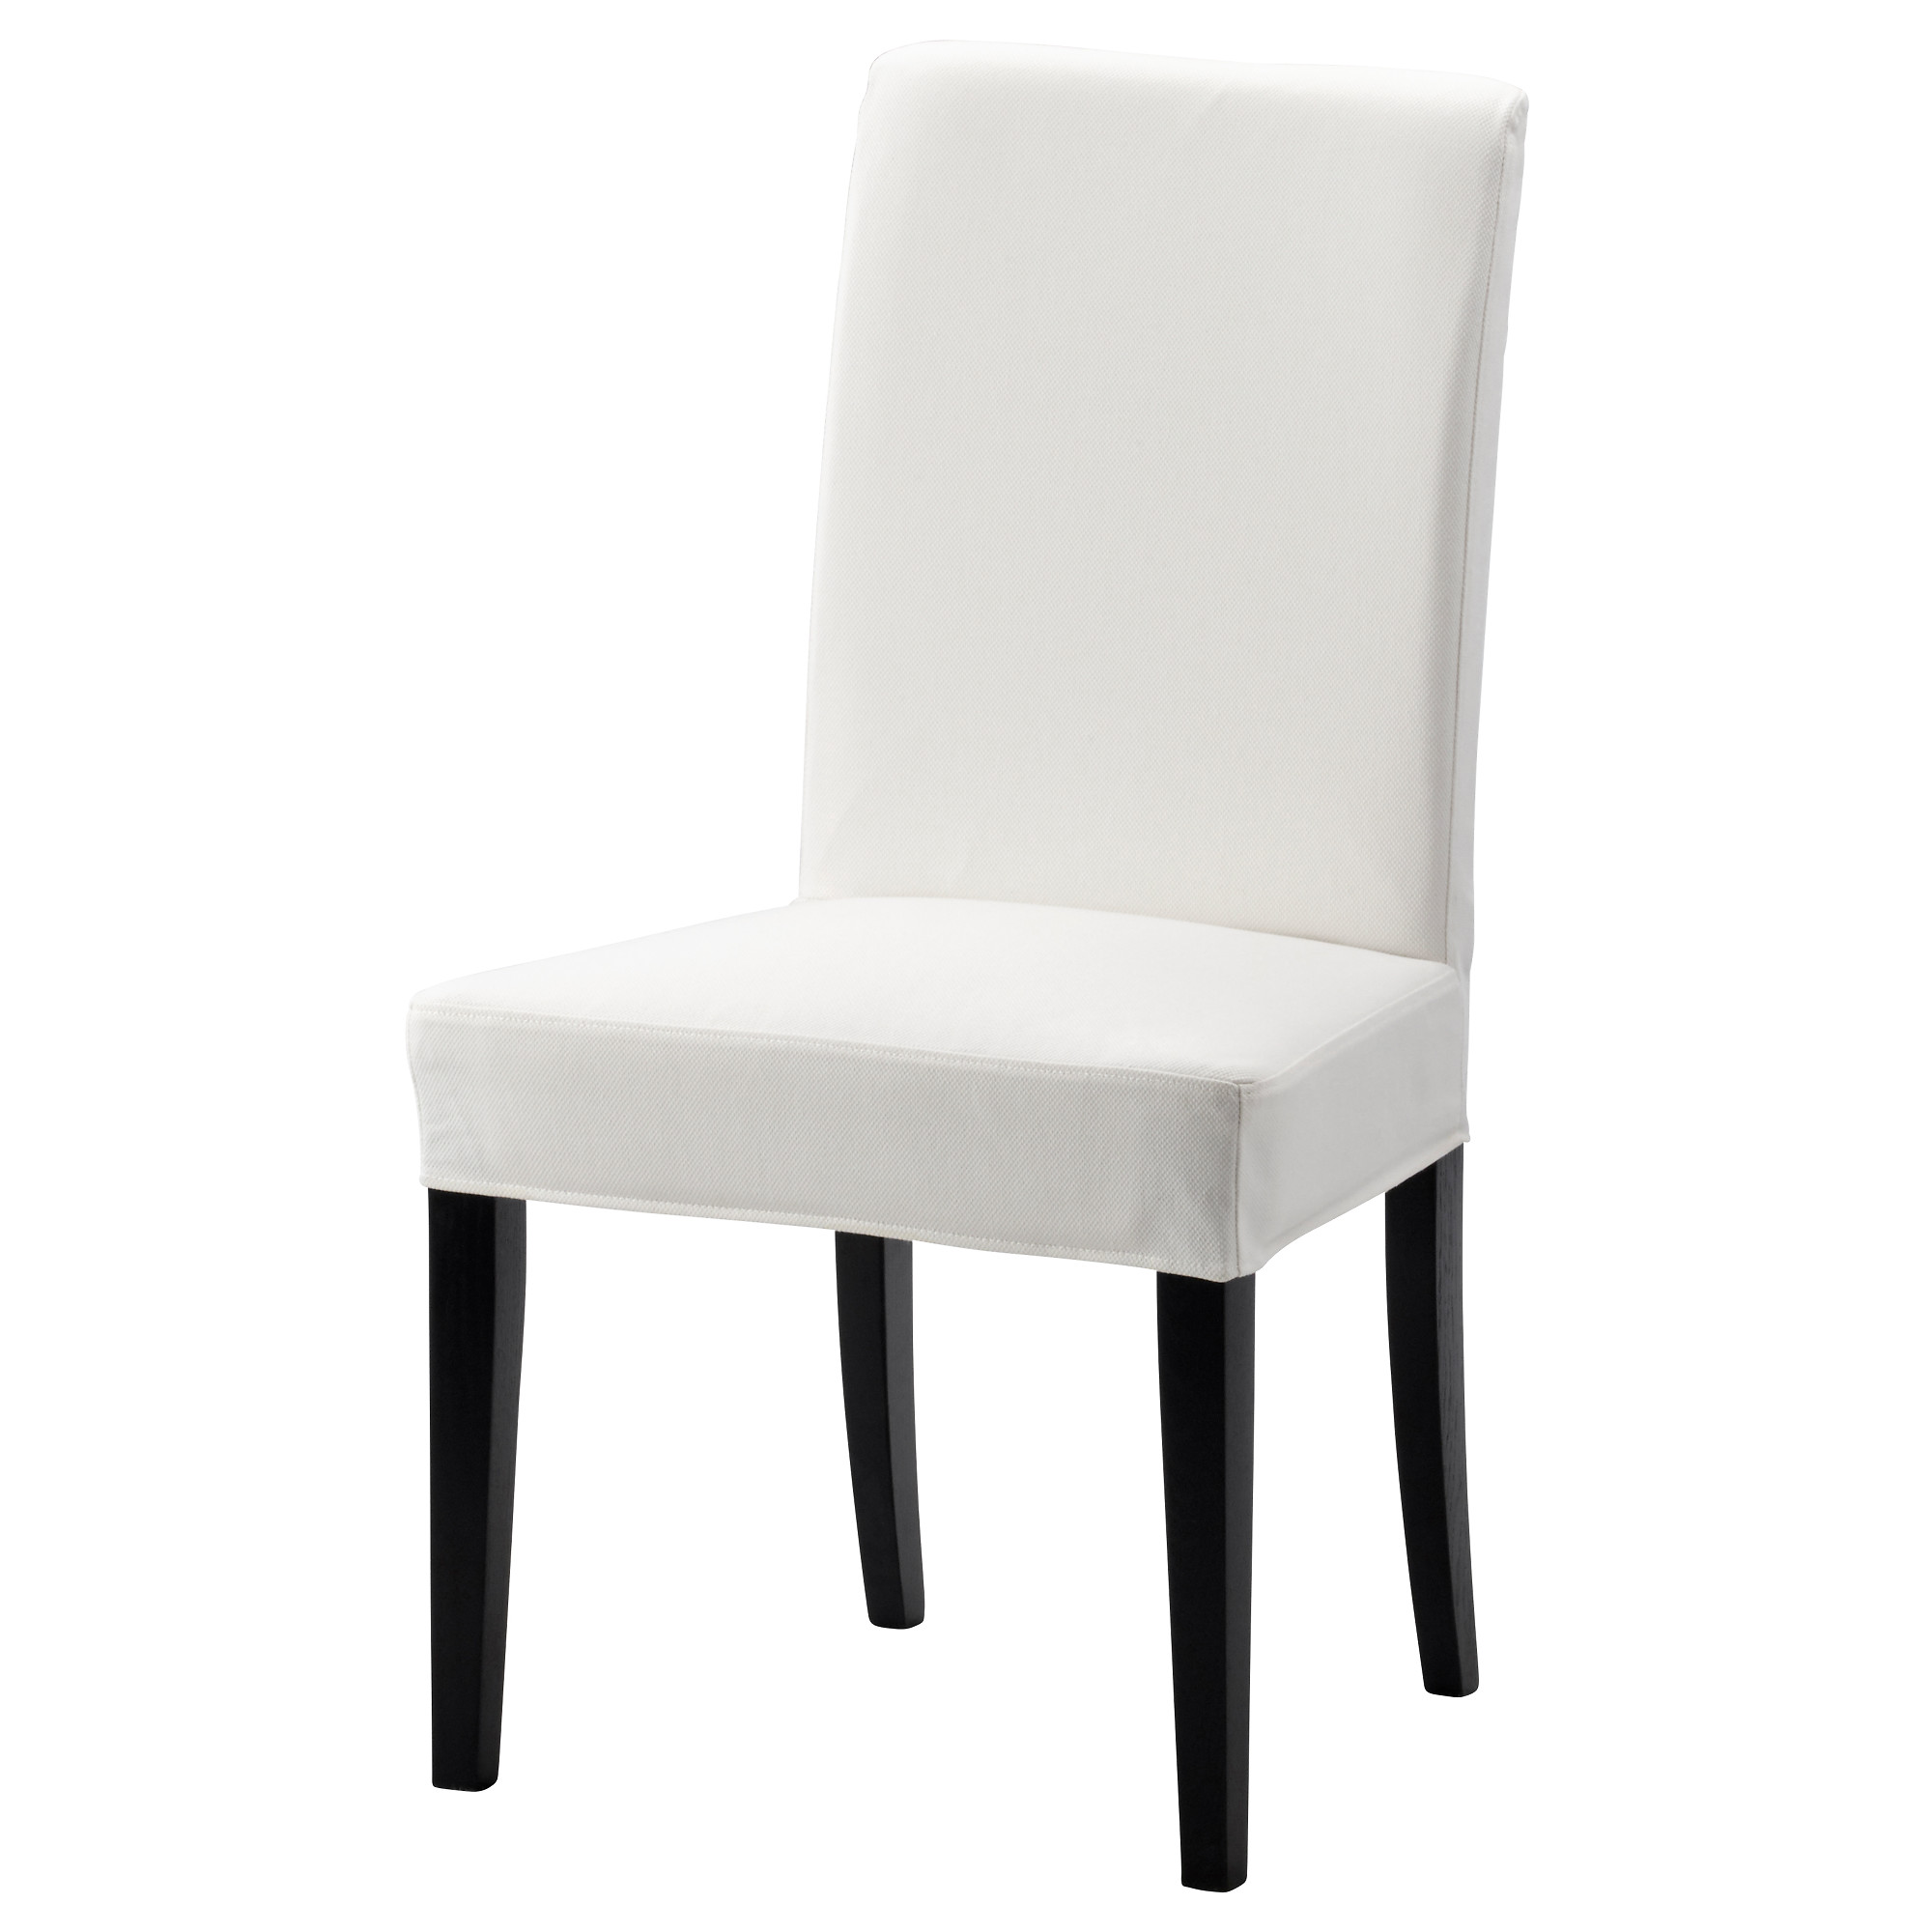 white dining chairs henriksdal chair, brown-black, gräsbo white tested for: 243 lb width: NWQRQAC